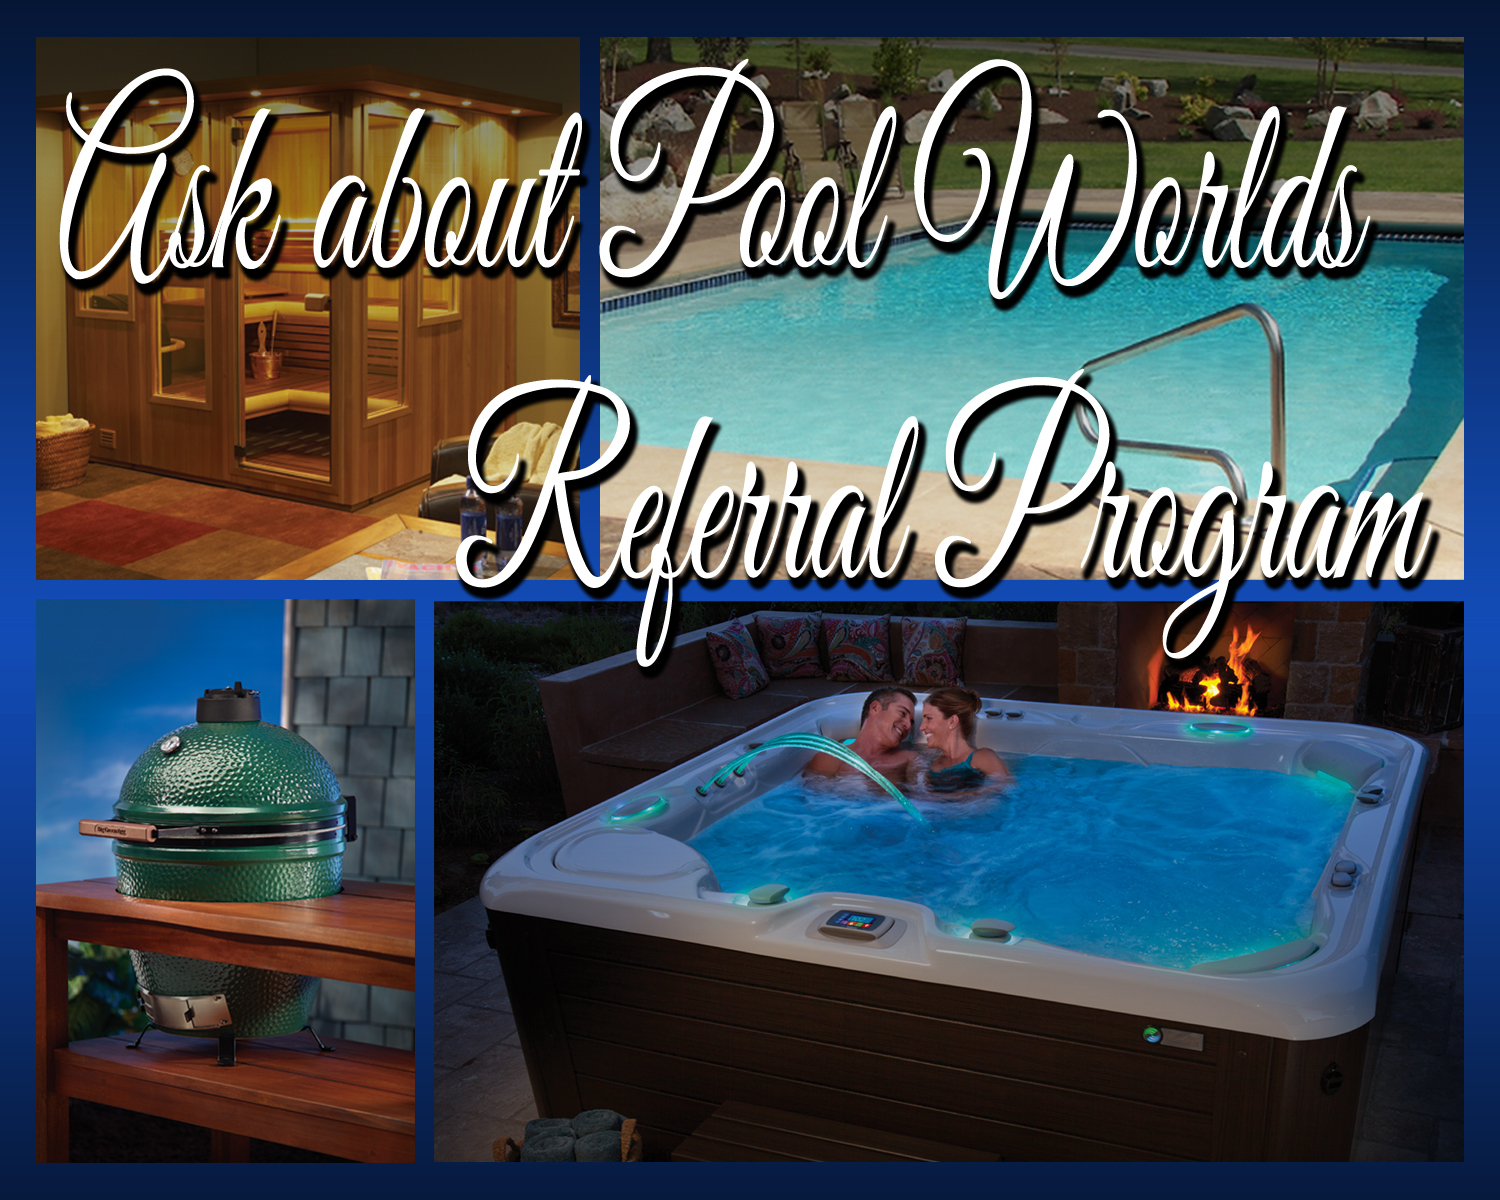 Have you ever heard about Pool Worlds referral program?